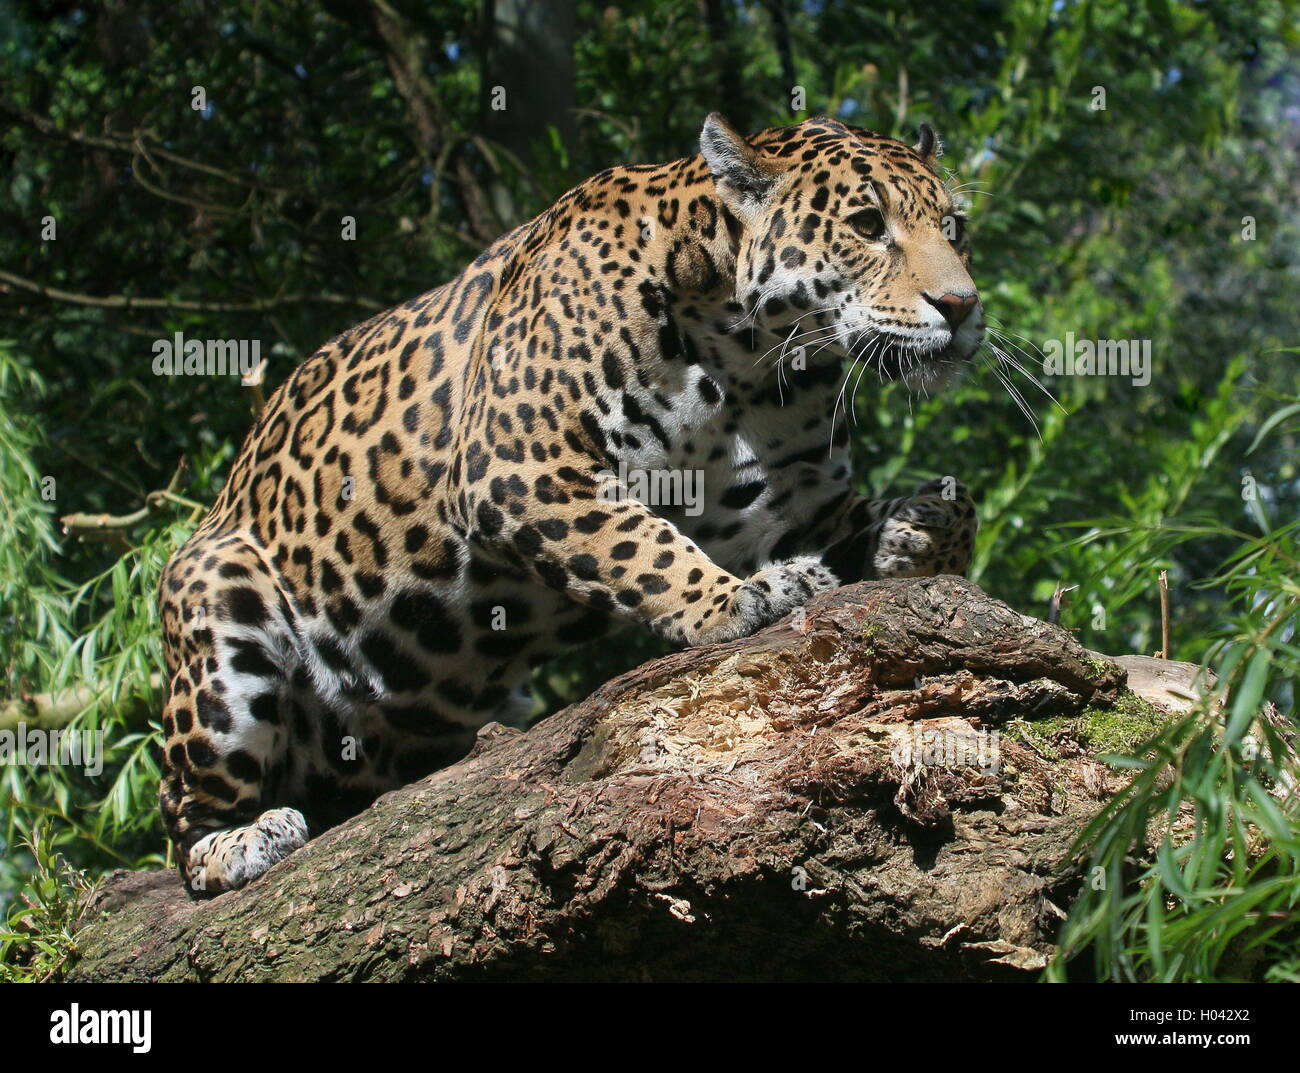 South American  Jaguar (Panthera onca) crouching down on a branch, ready to pounce Stock Photo